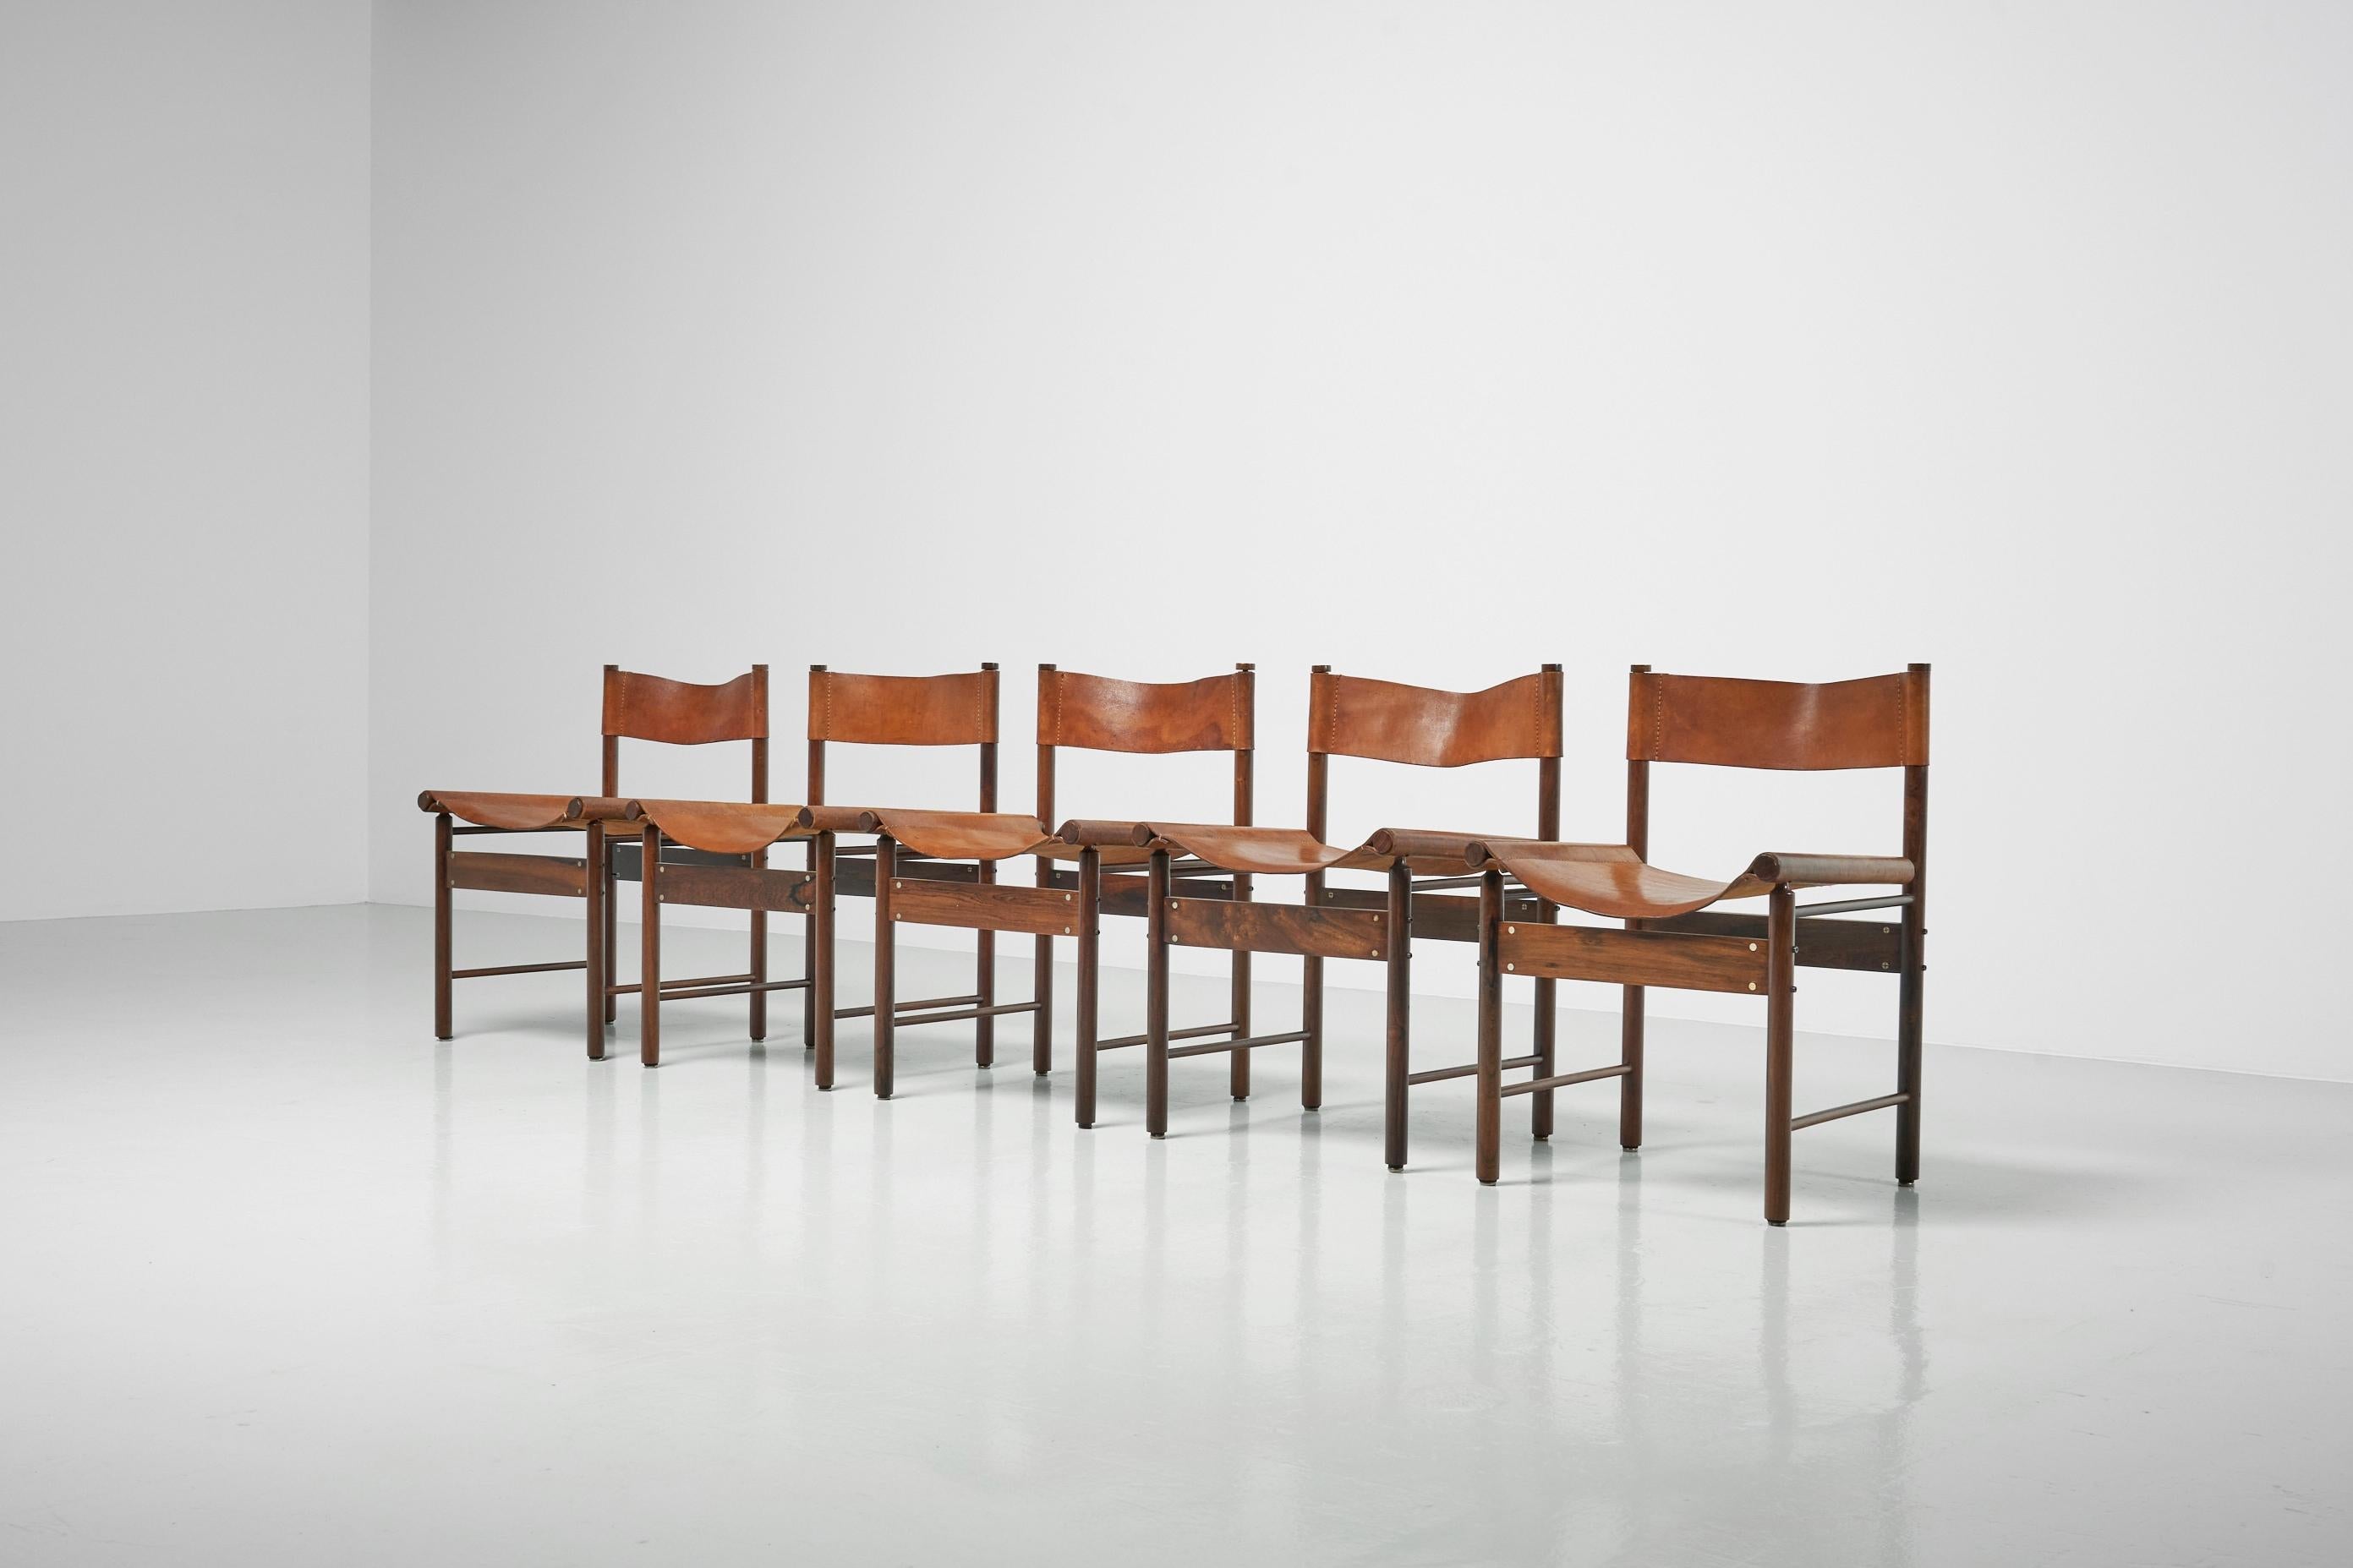 Rare set of five so-called Jockey chairs designed by Jorge Zalszupin and manufactured by his own company L’Atelier, Brazil 1959. The Jockey chair is one of L’Ateliers’ early models and is designed with mass production and efficient use of materials